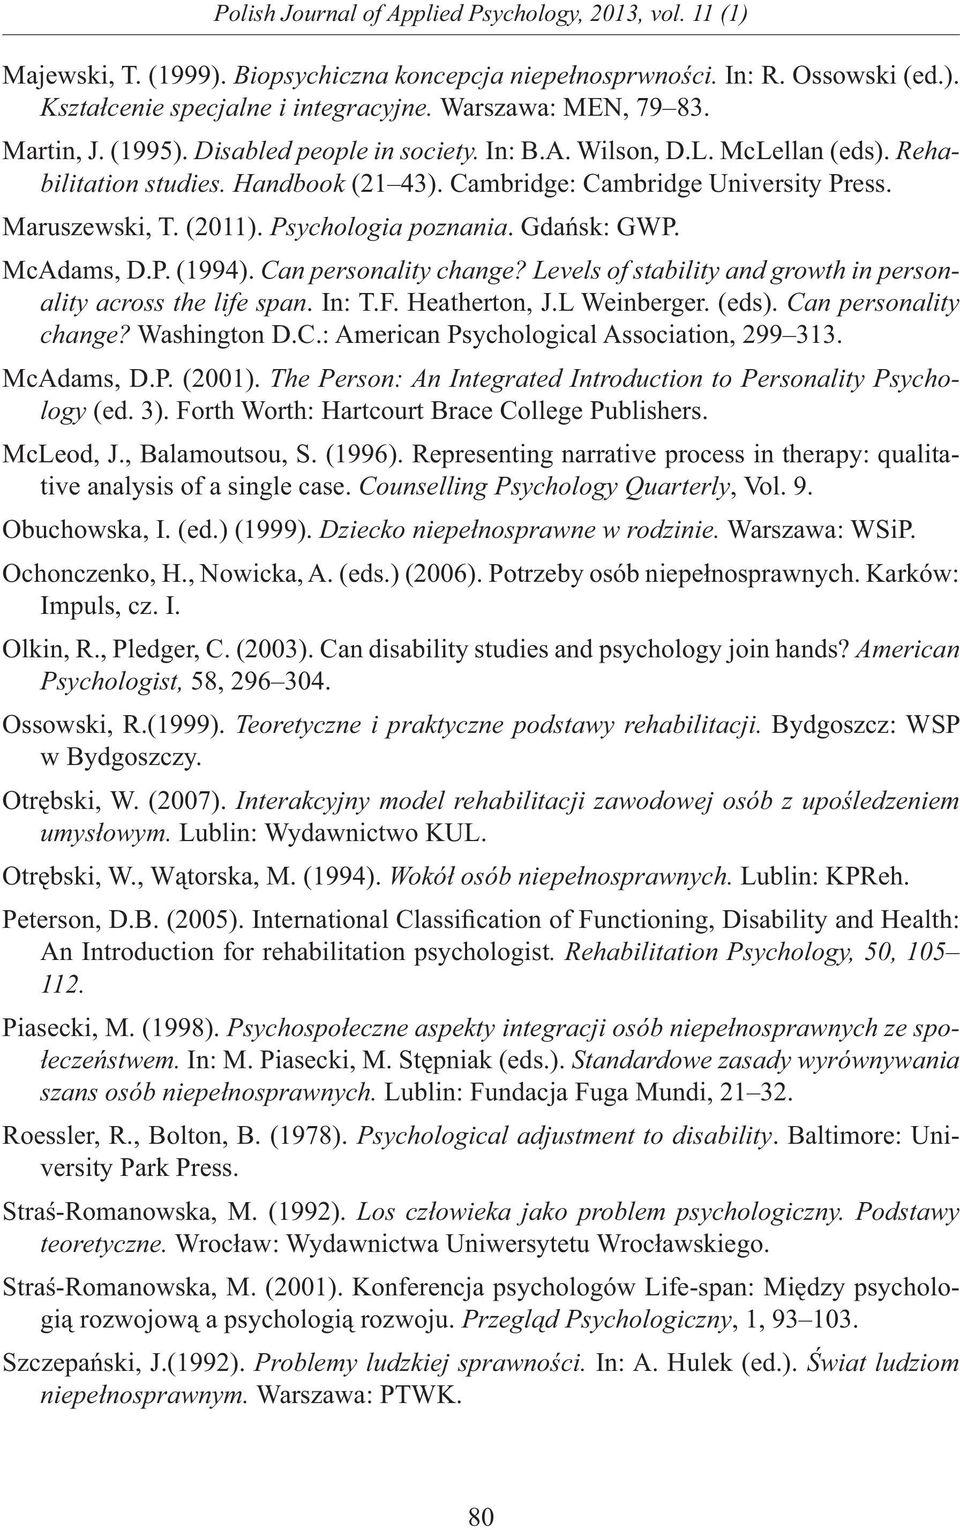 Maruszewski, T. (2011). Psychologia poznania. Gdańsk: GWP. McAdams, D.P. (1994). Can personality change? Levels of stability and growth in personality across the life span. In: T.F. Heatherton, J.